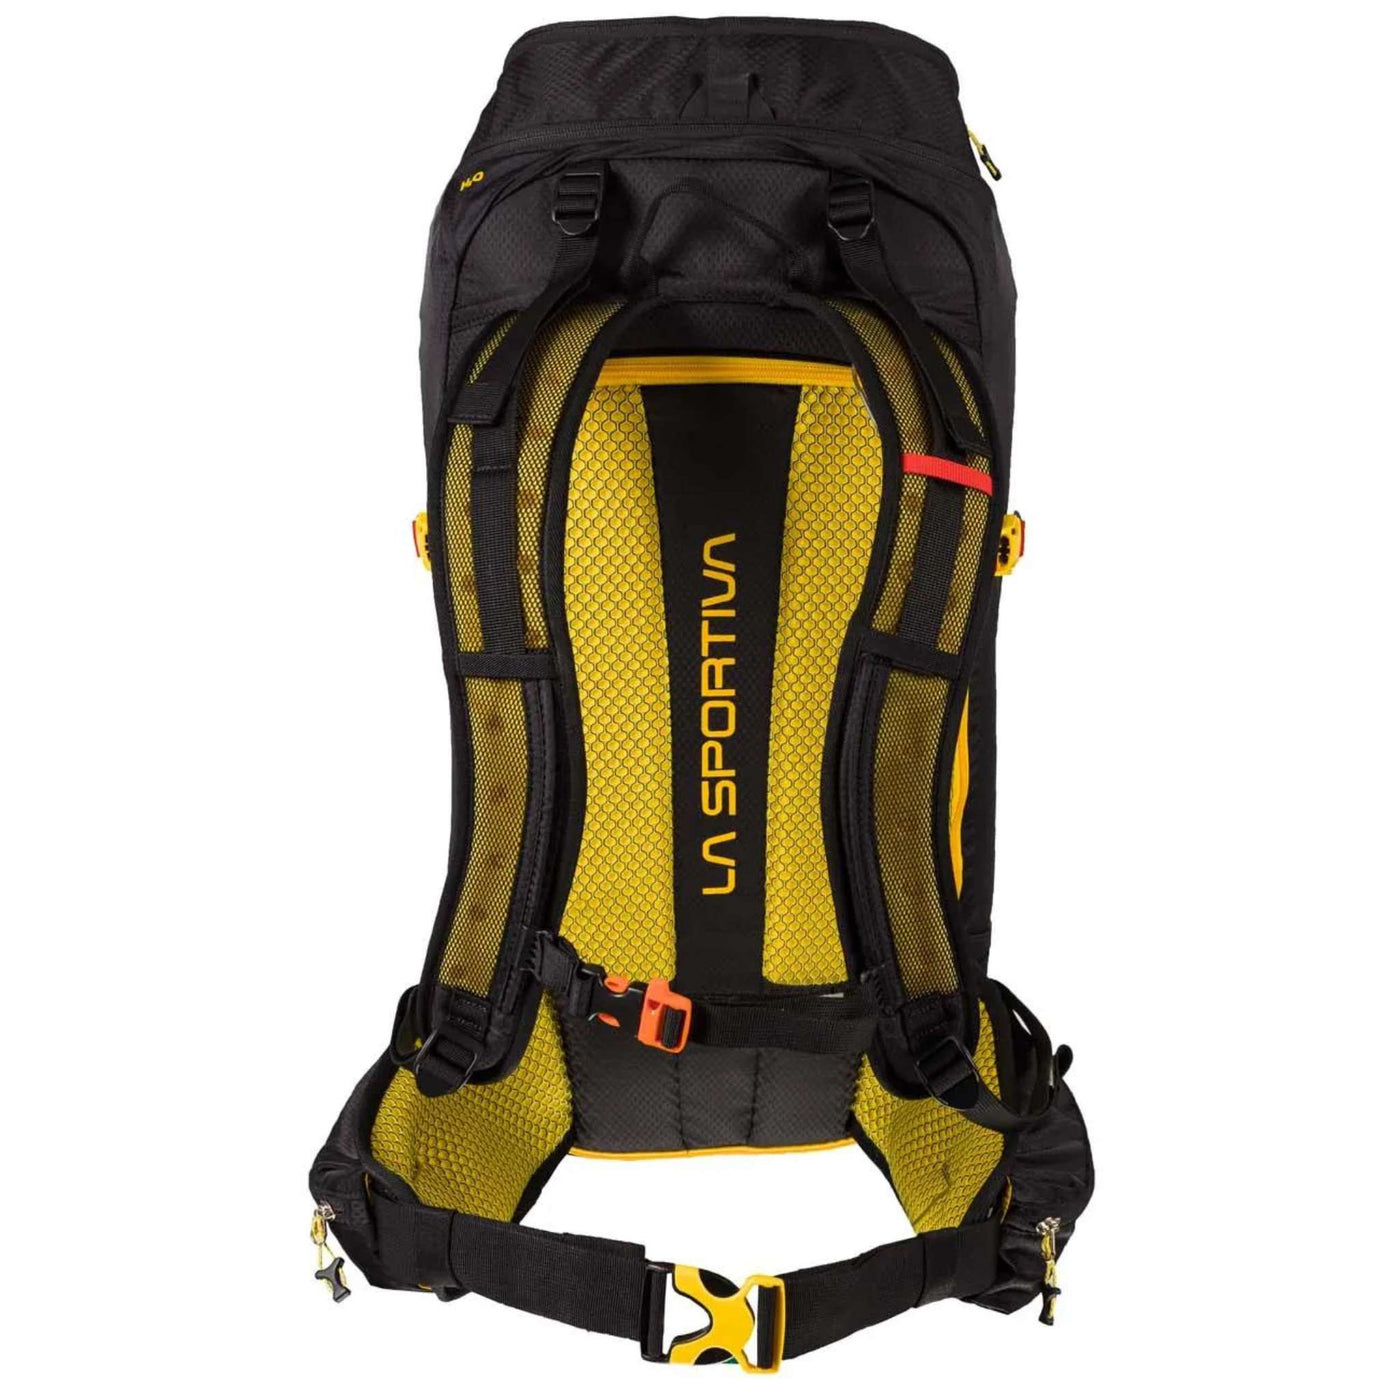 La Sportiva Backpack Sunlite - 40L | Ski Mountaineering Backpack NZ | Further Faster Christchurch NZ #black-yellow